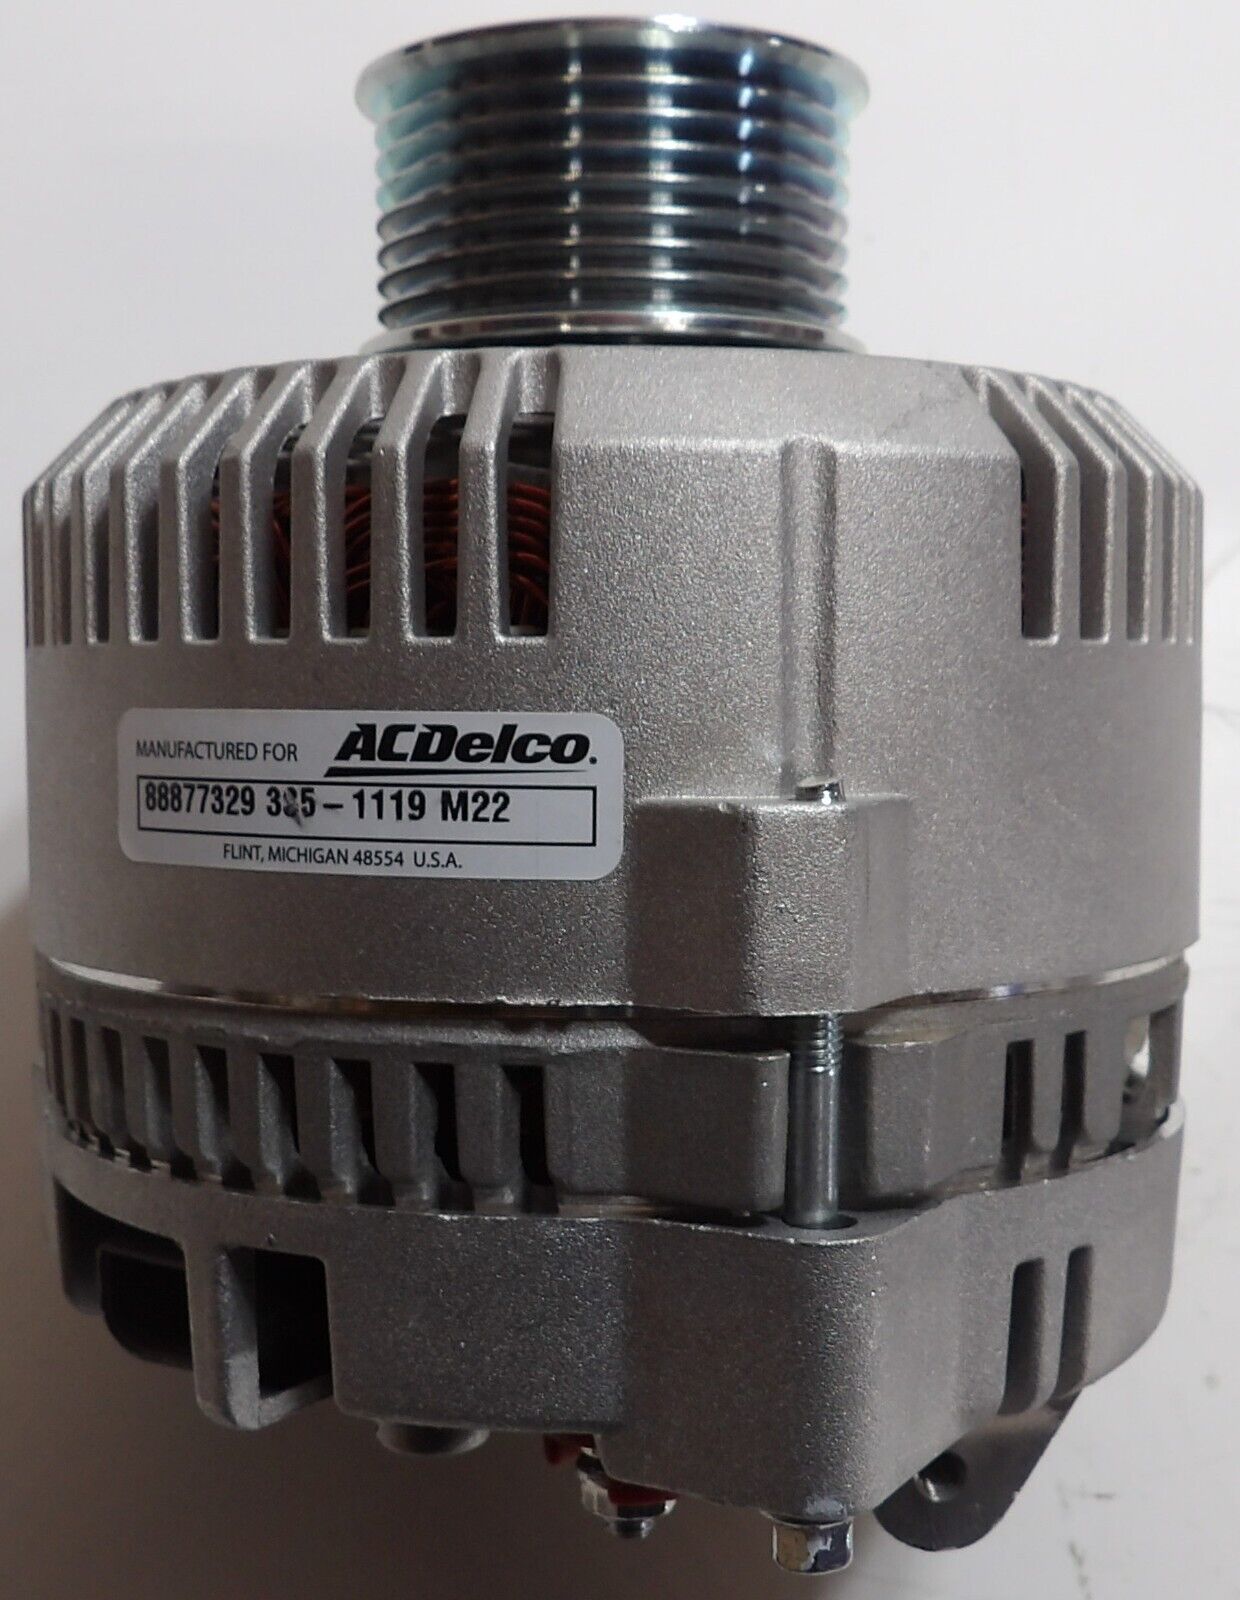 ACDelco 335-1119 Alternator Fits Ford/Lincoln/Mercury